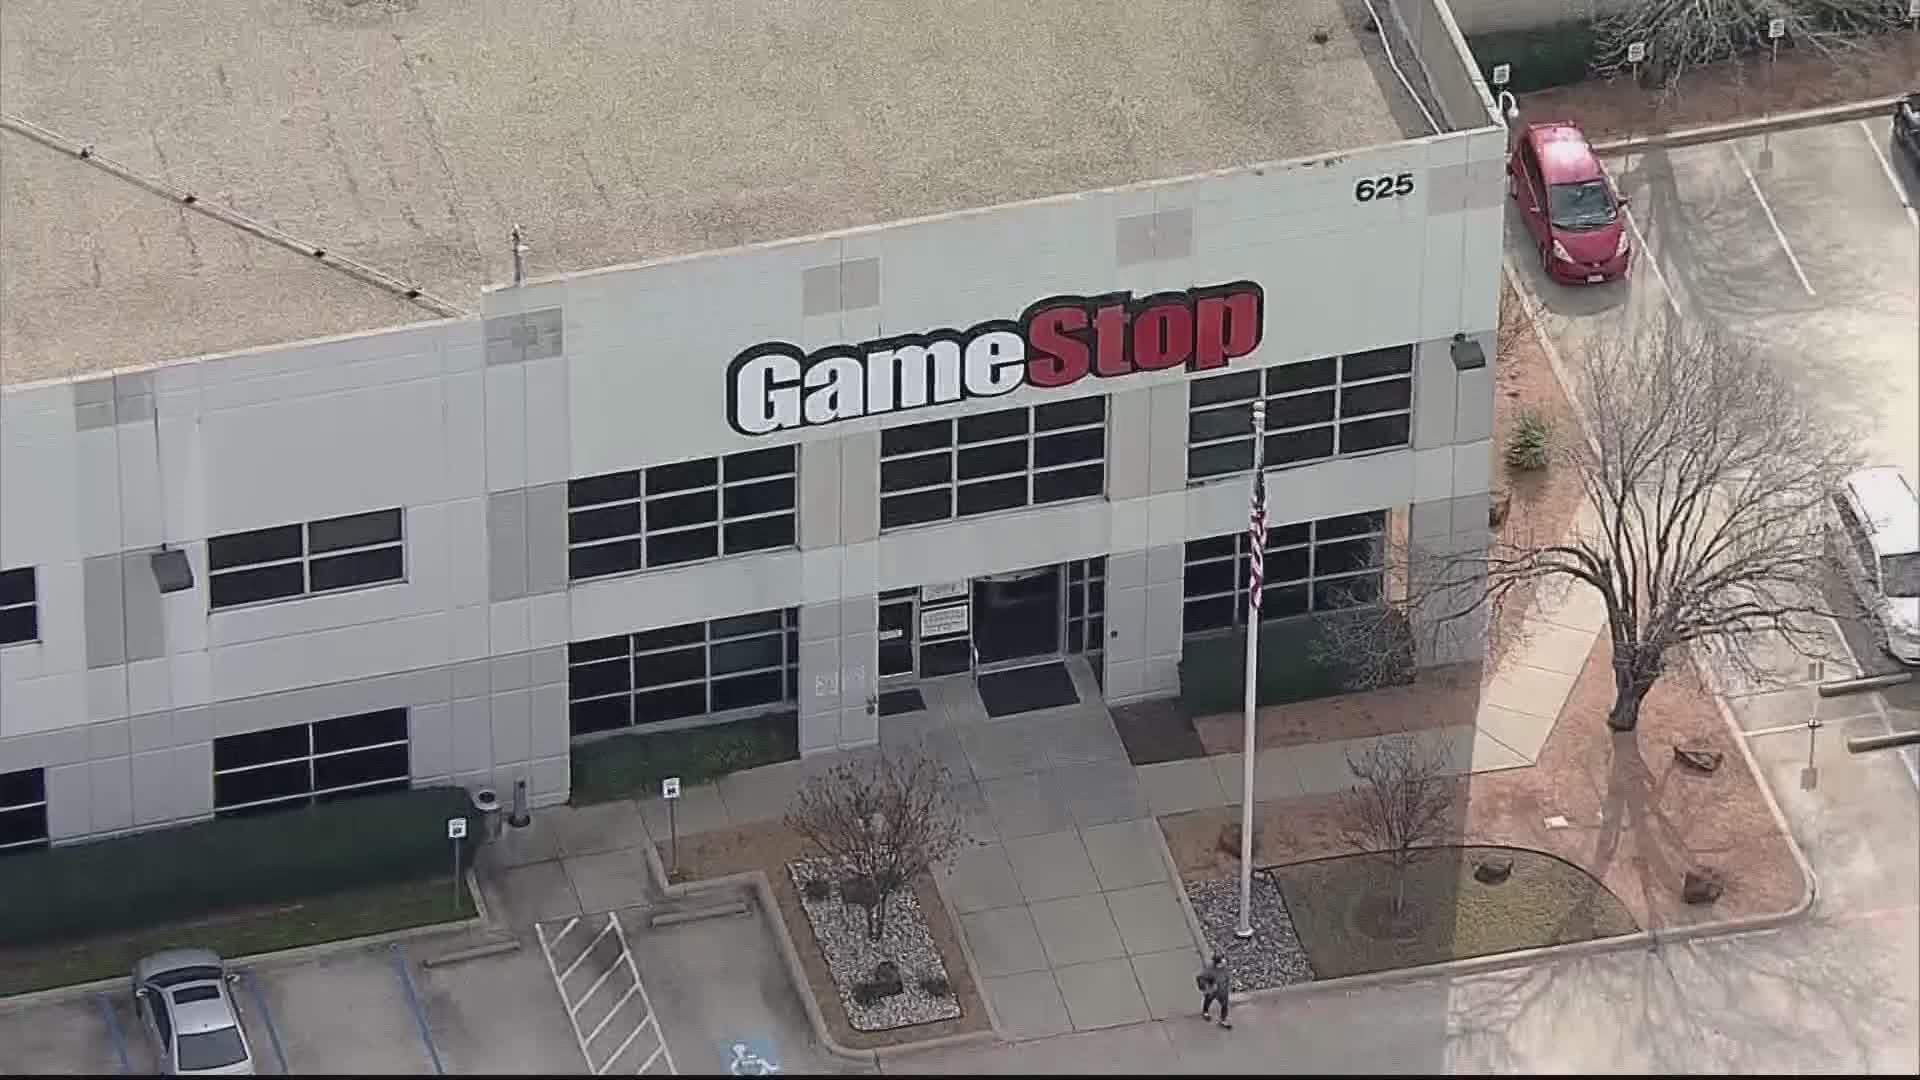 Paxton issued 13 civil investigative demands Friday after traders were restricted from buying GameStop stock as hedge funds bled cash after shorting the company.